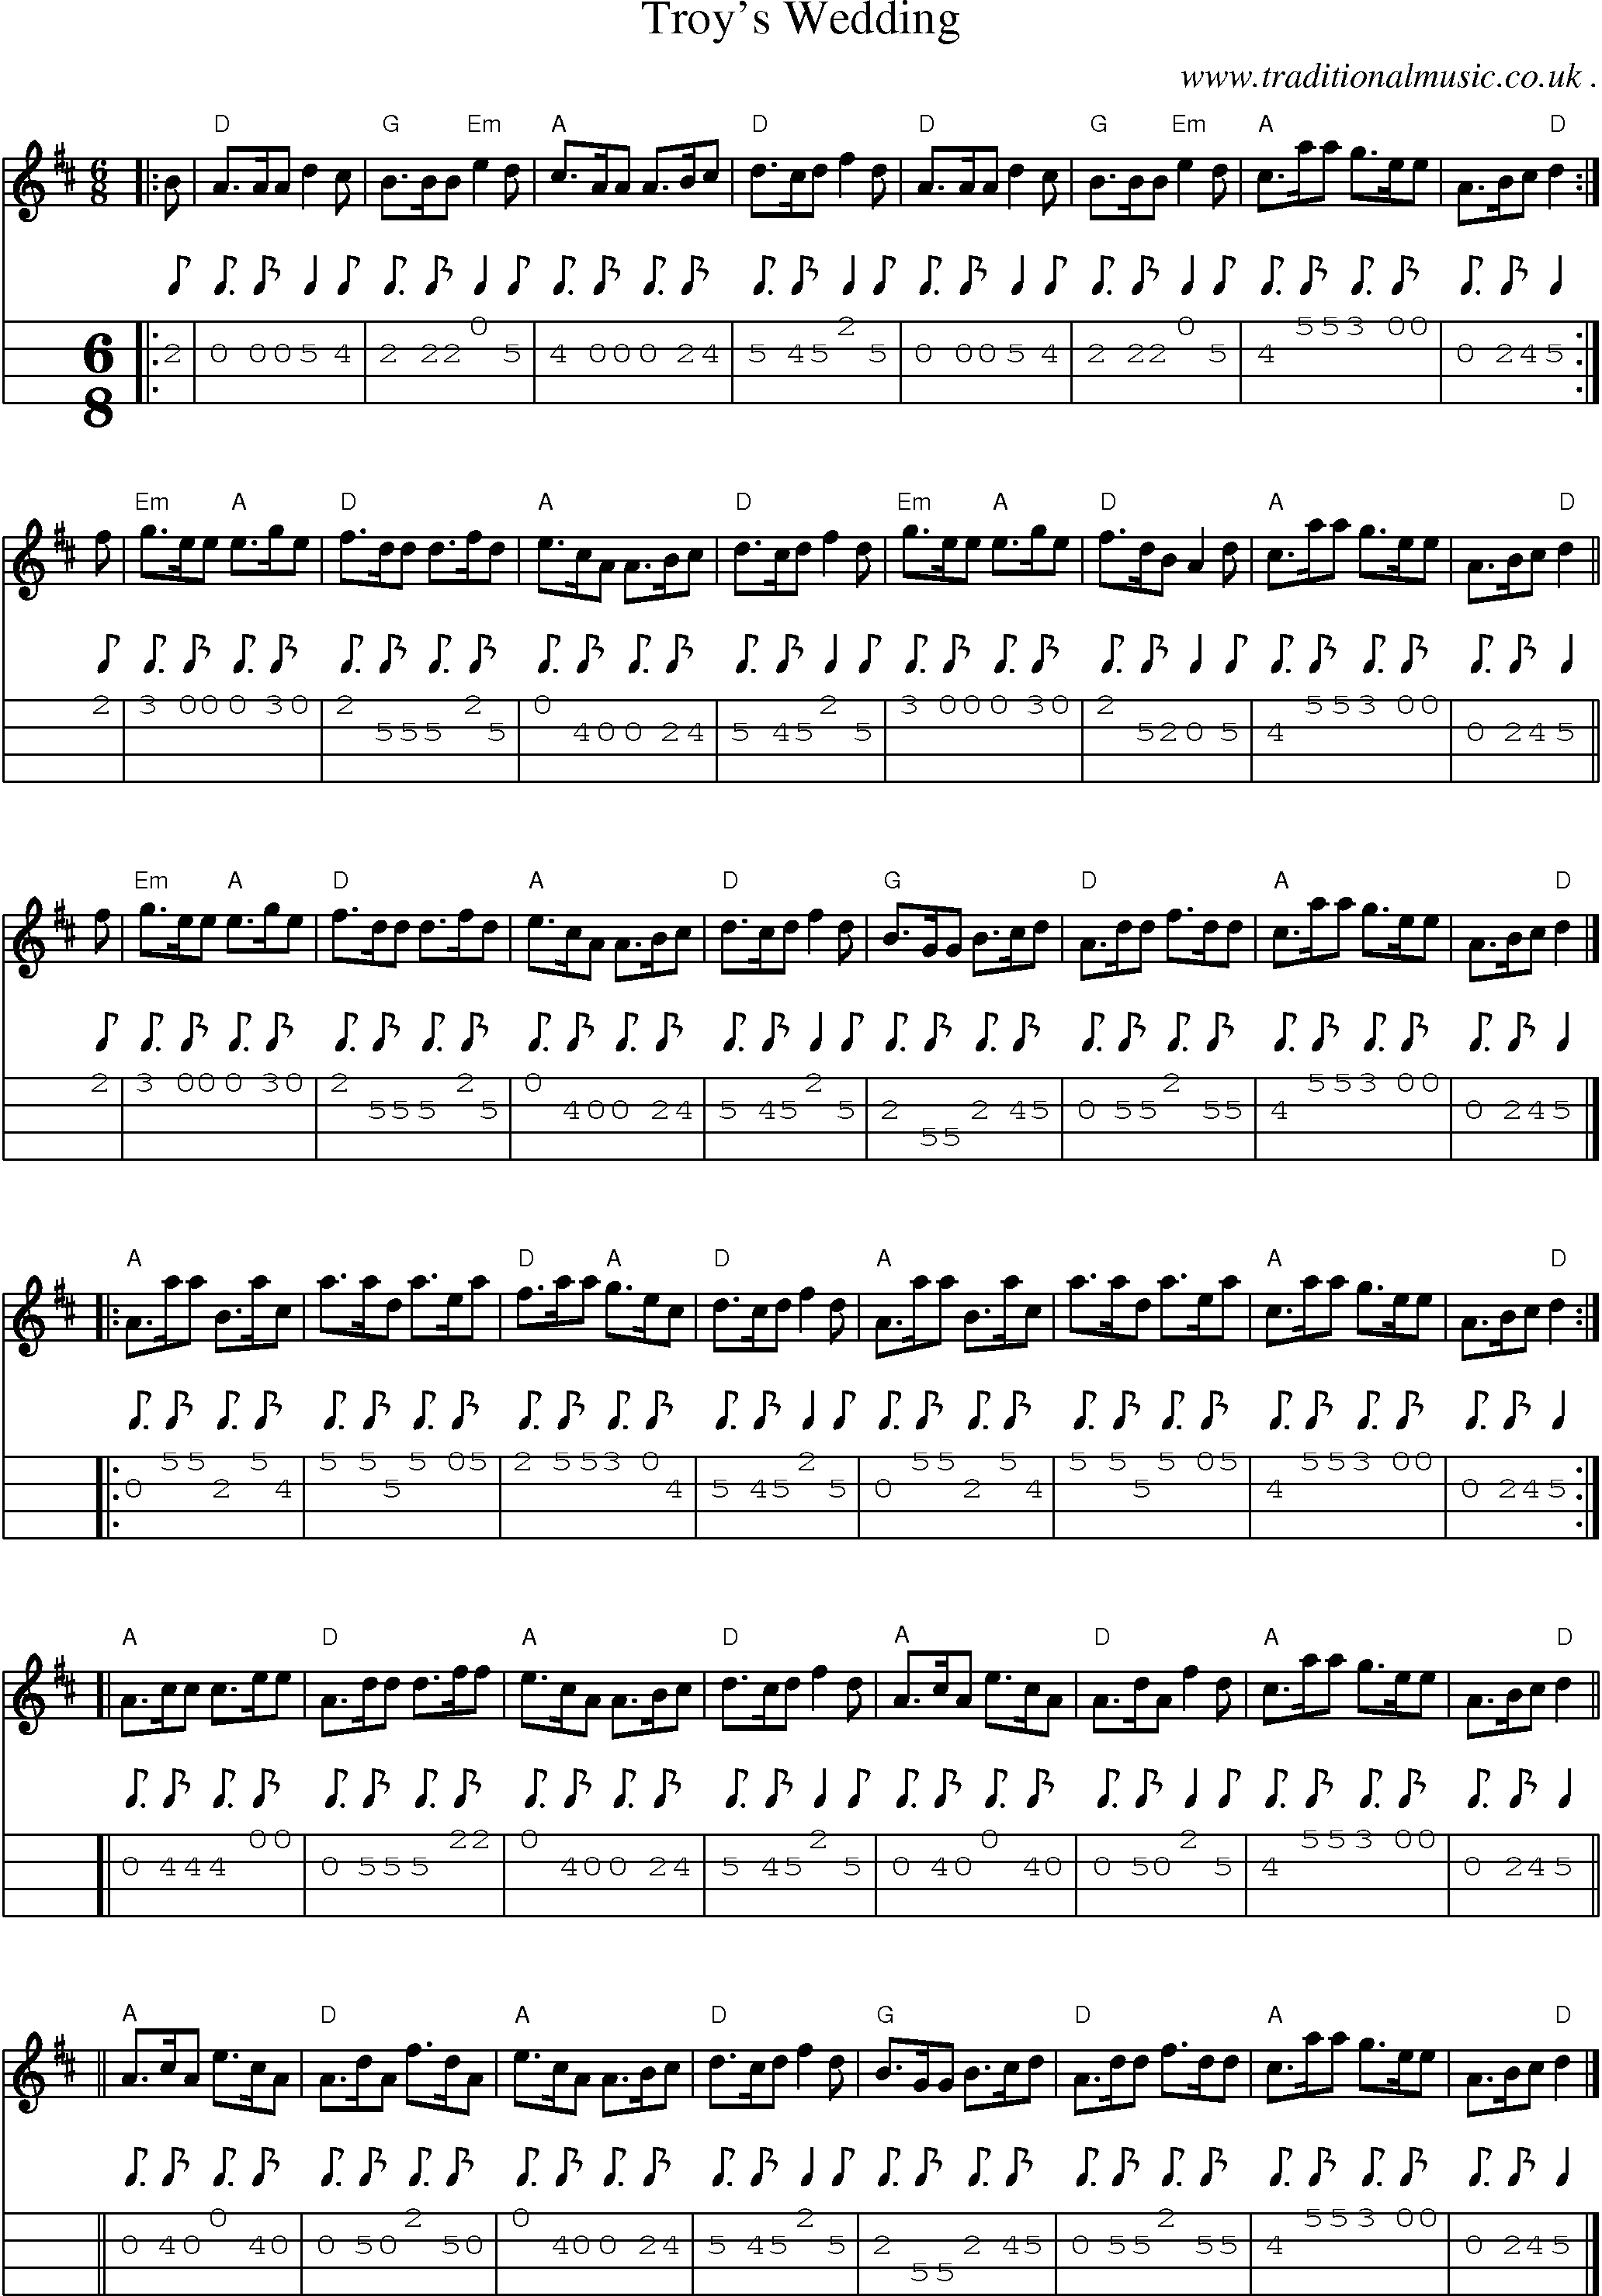 Sheet-music  score, Chords and Mandolin Tabs for Troys Wedding